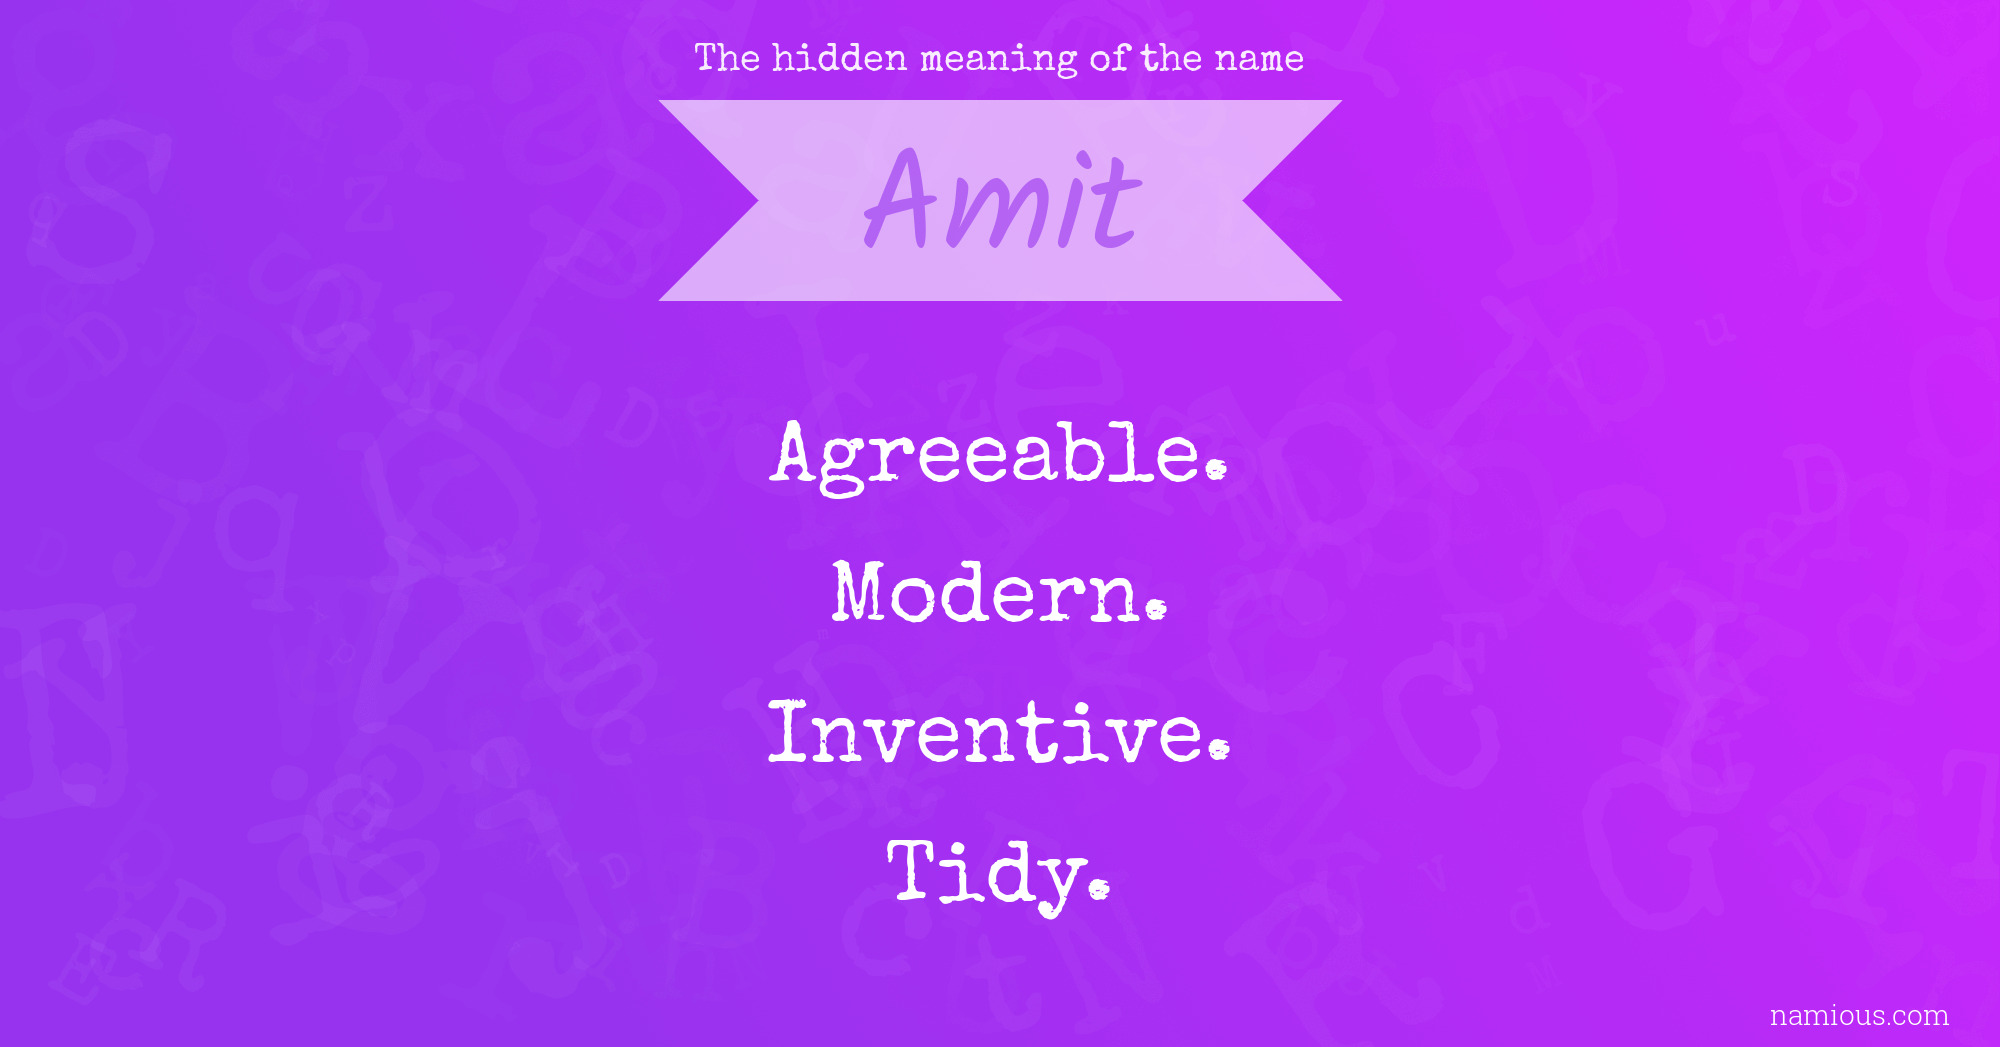 The hidden meaning of the name Amit